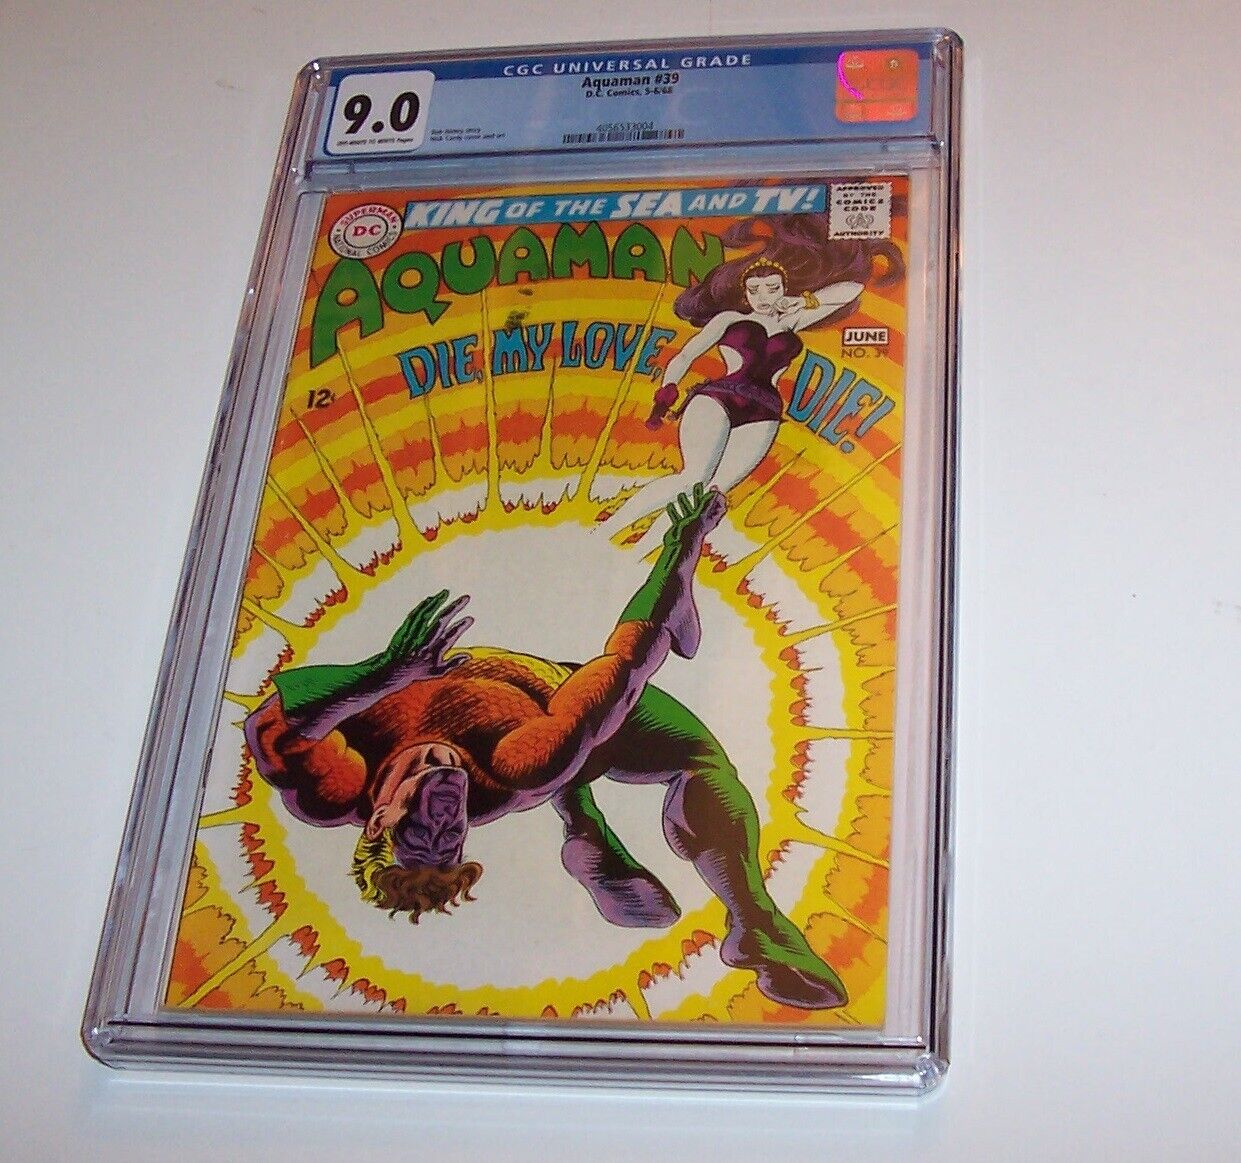 Aquaman #39 - DC 1968 Silver Age issue - CGC VF/NM 9.0 - Nick Cardy cover